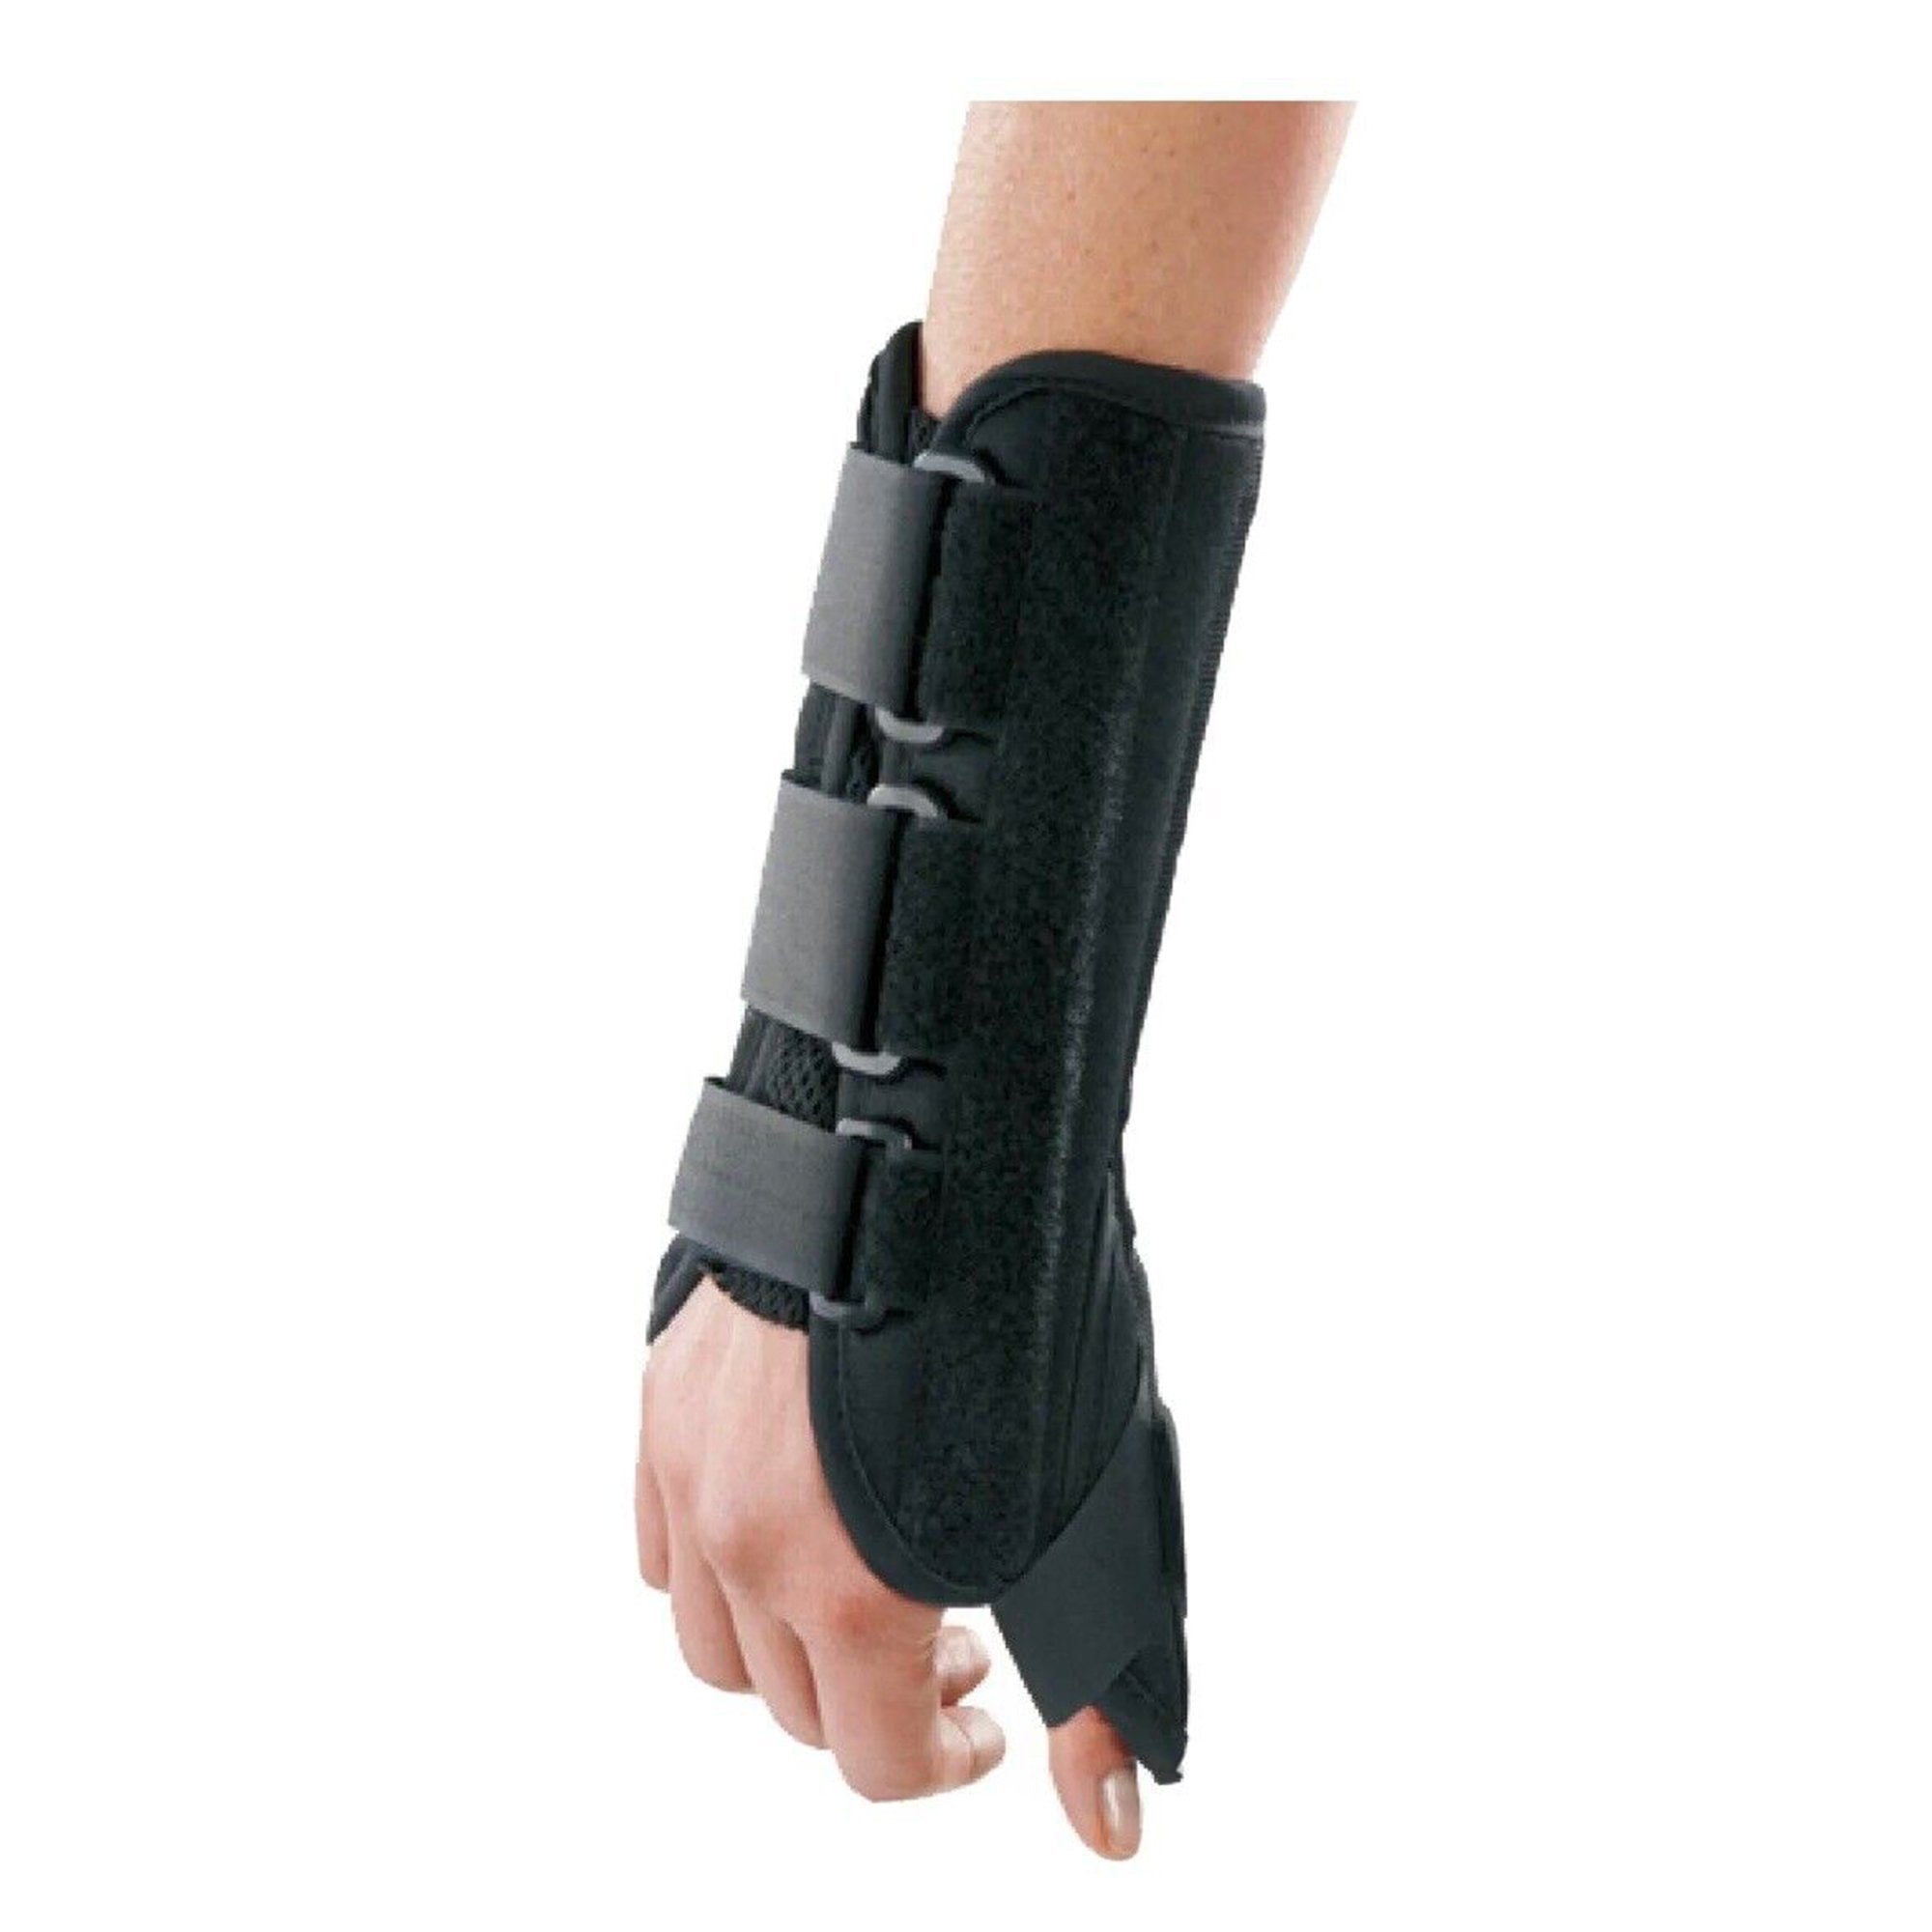 Apollo Universal Wrist Brace with Thumb Spica, 10Inch Length, for Right Wrist